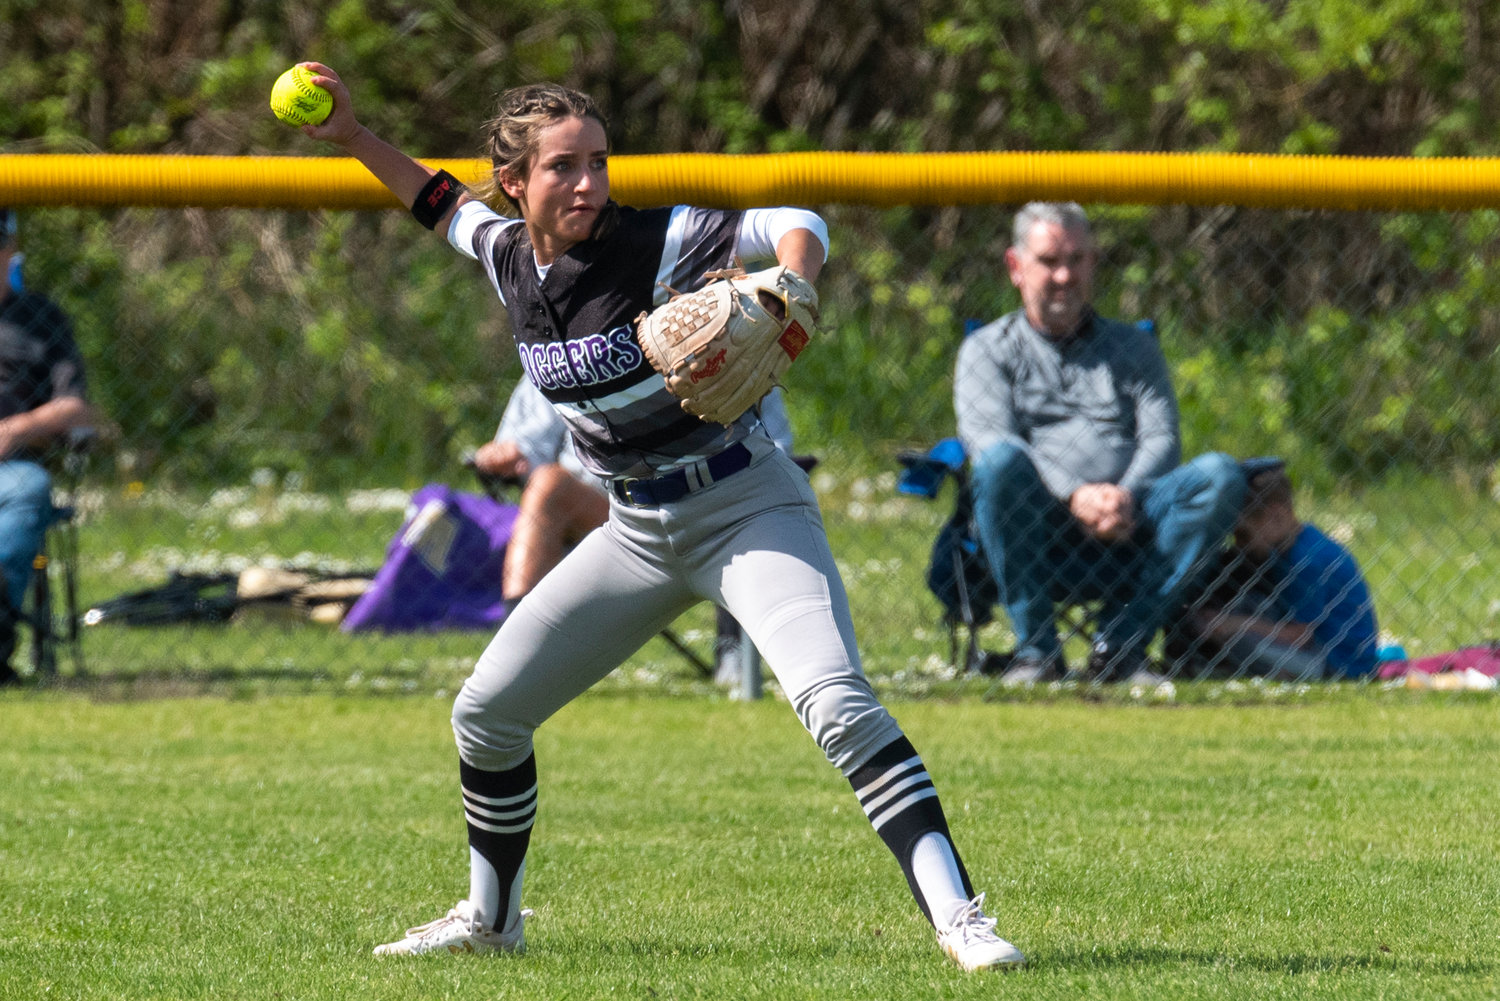 Onalaska's left fielder makes a throw during a road game in Adna on May 4.